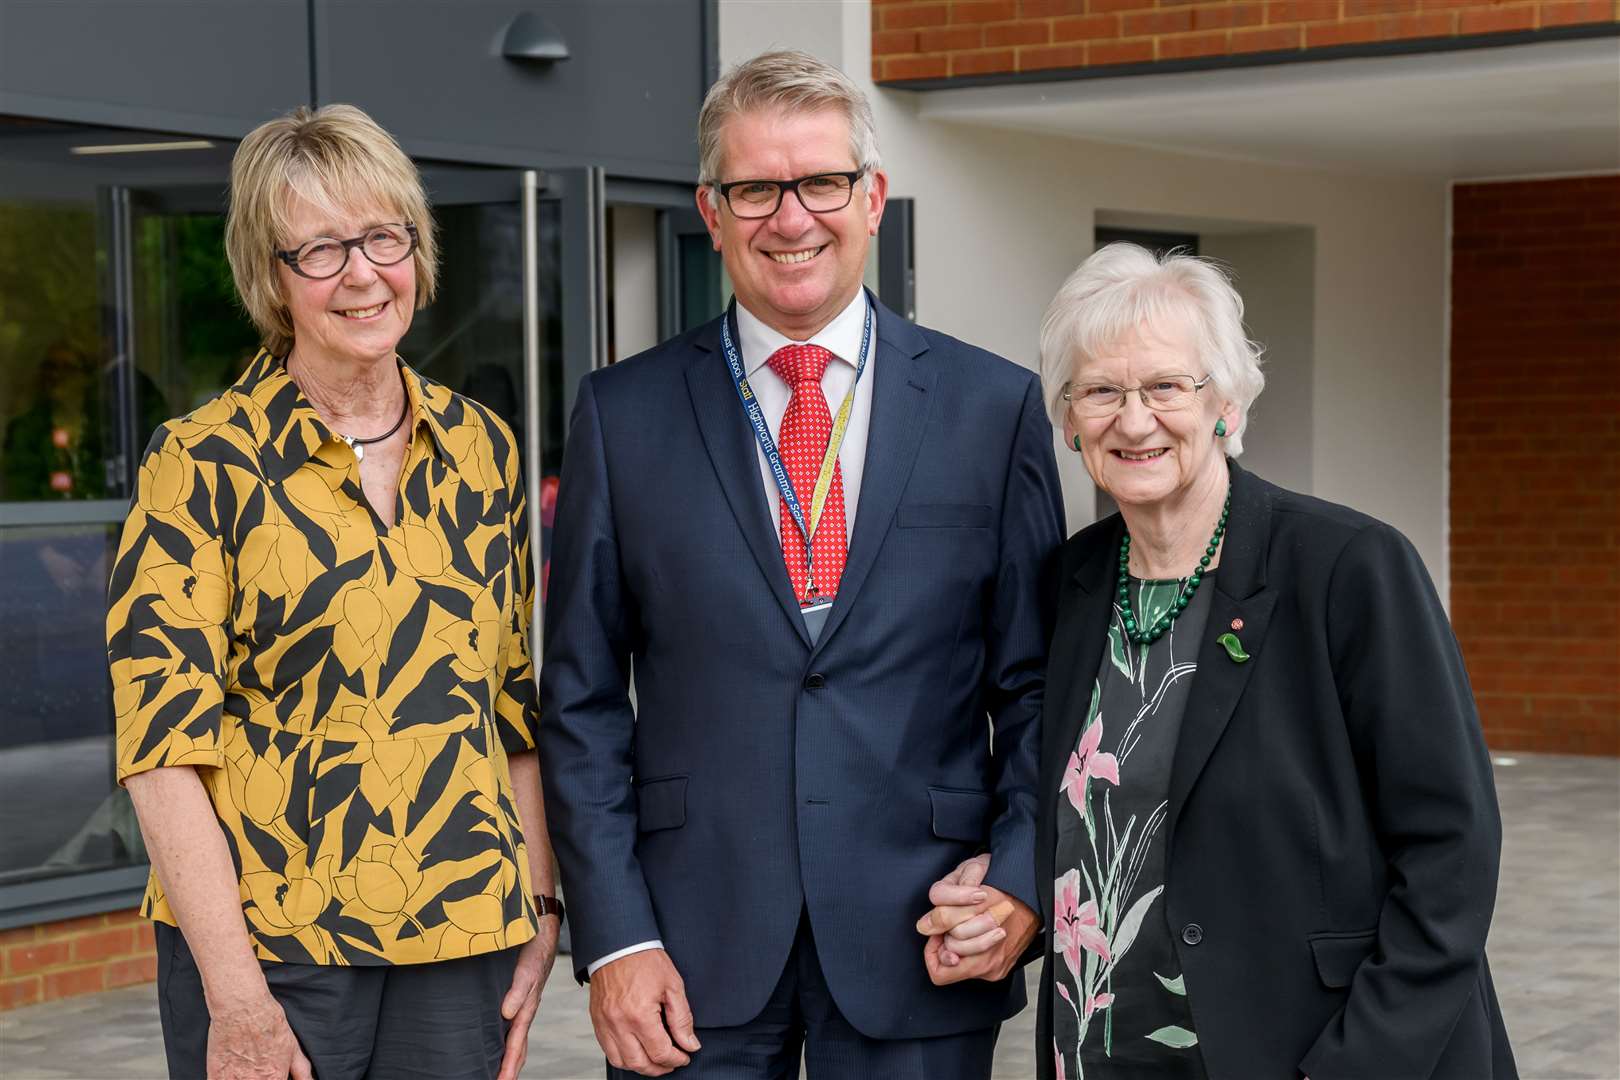 Two of Highworth's previous headteachers came to the unveiling, Lesley Lee who ran the school from 1994 to 2006 and Jean Byers - head from 1987 to 1994. Current headteacher Paul Danielsen is centre.